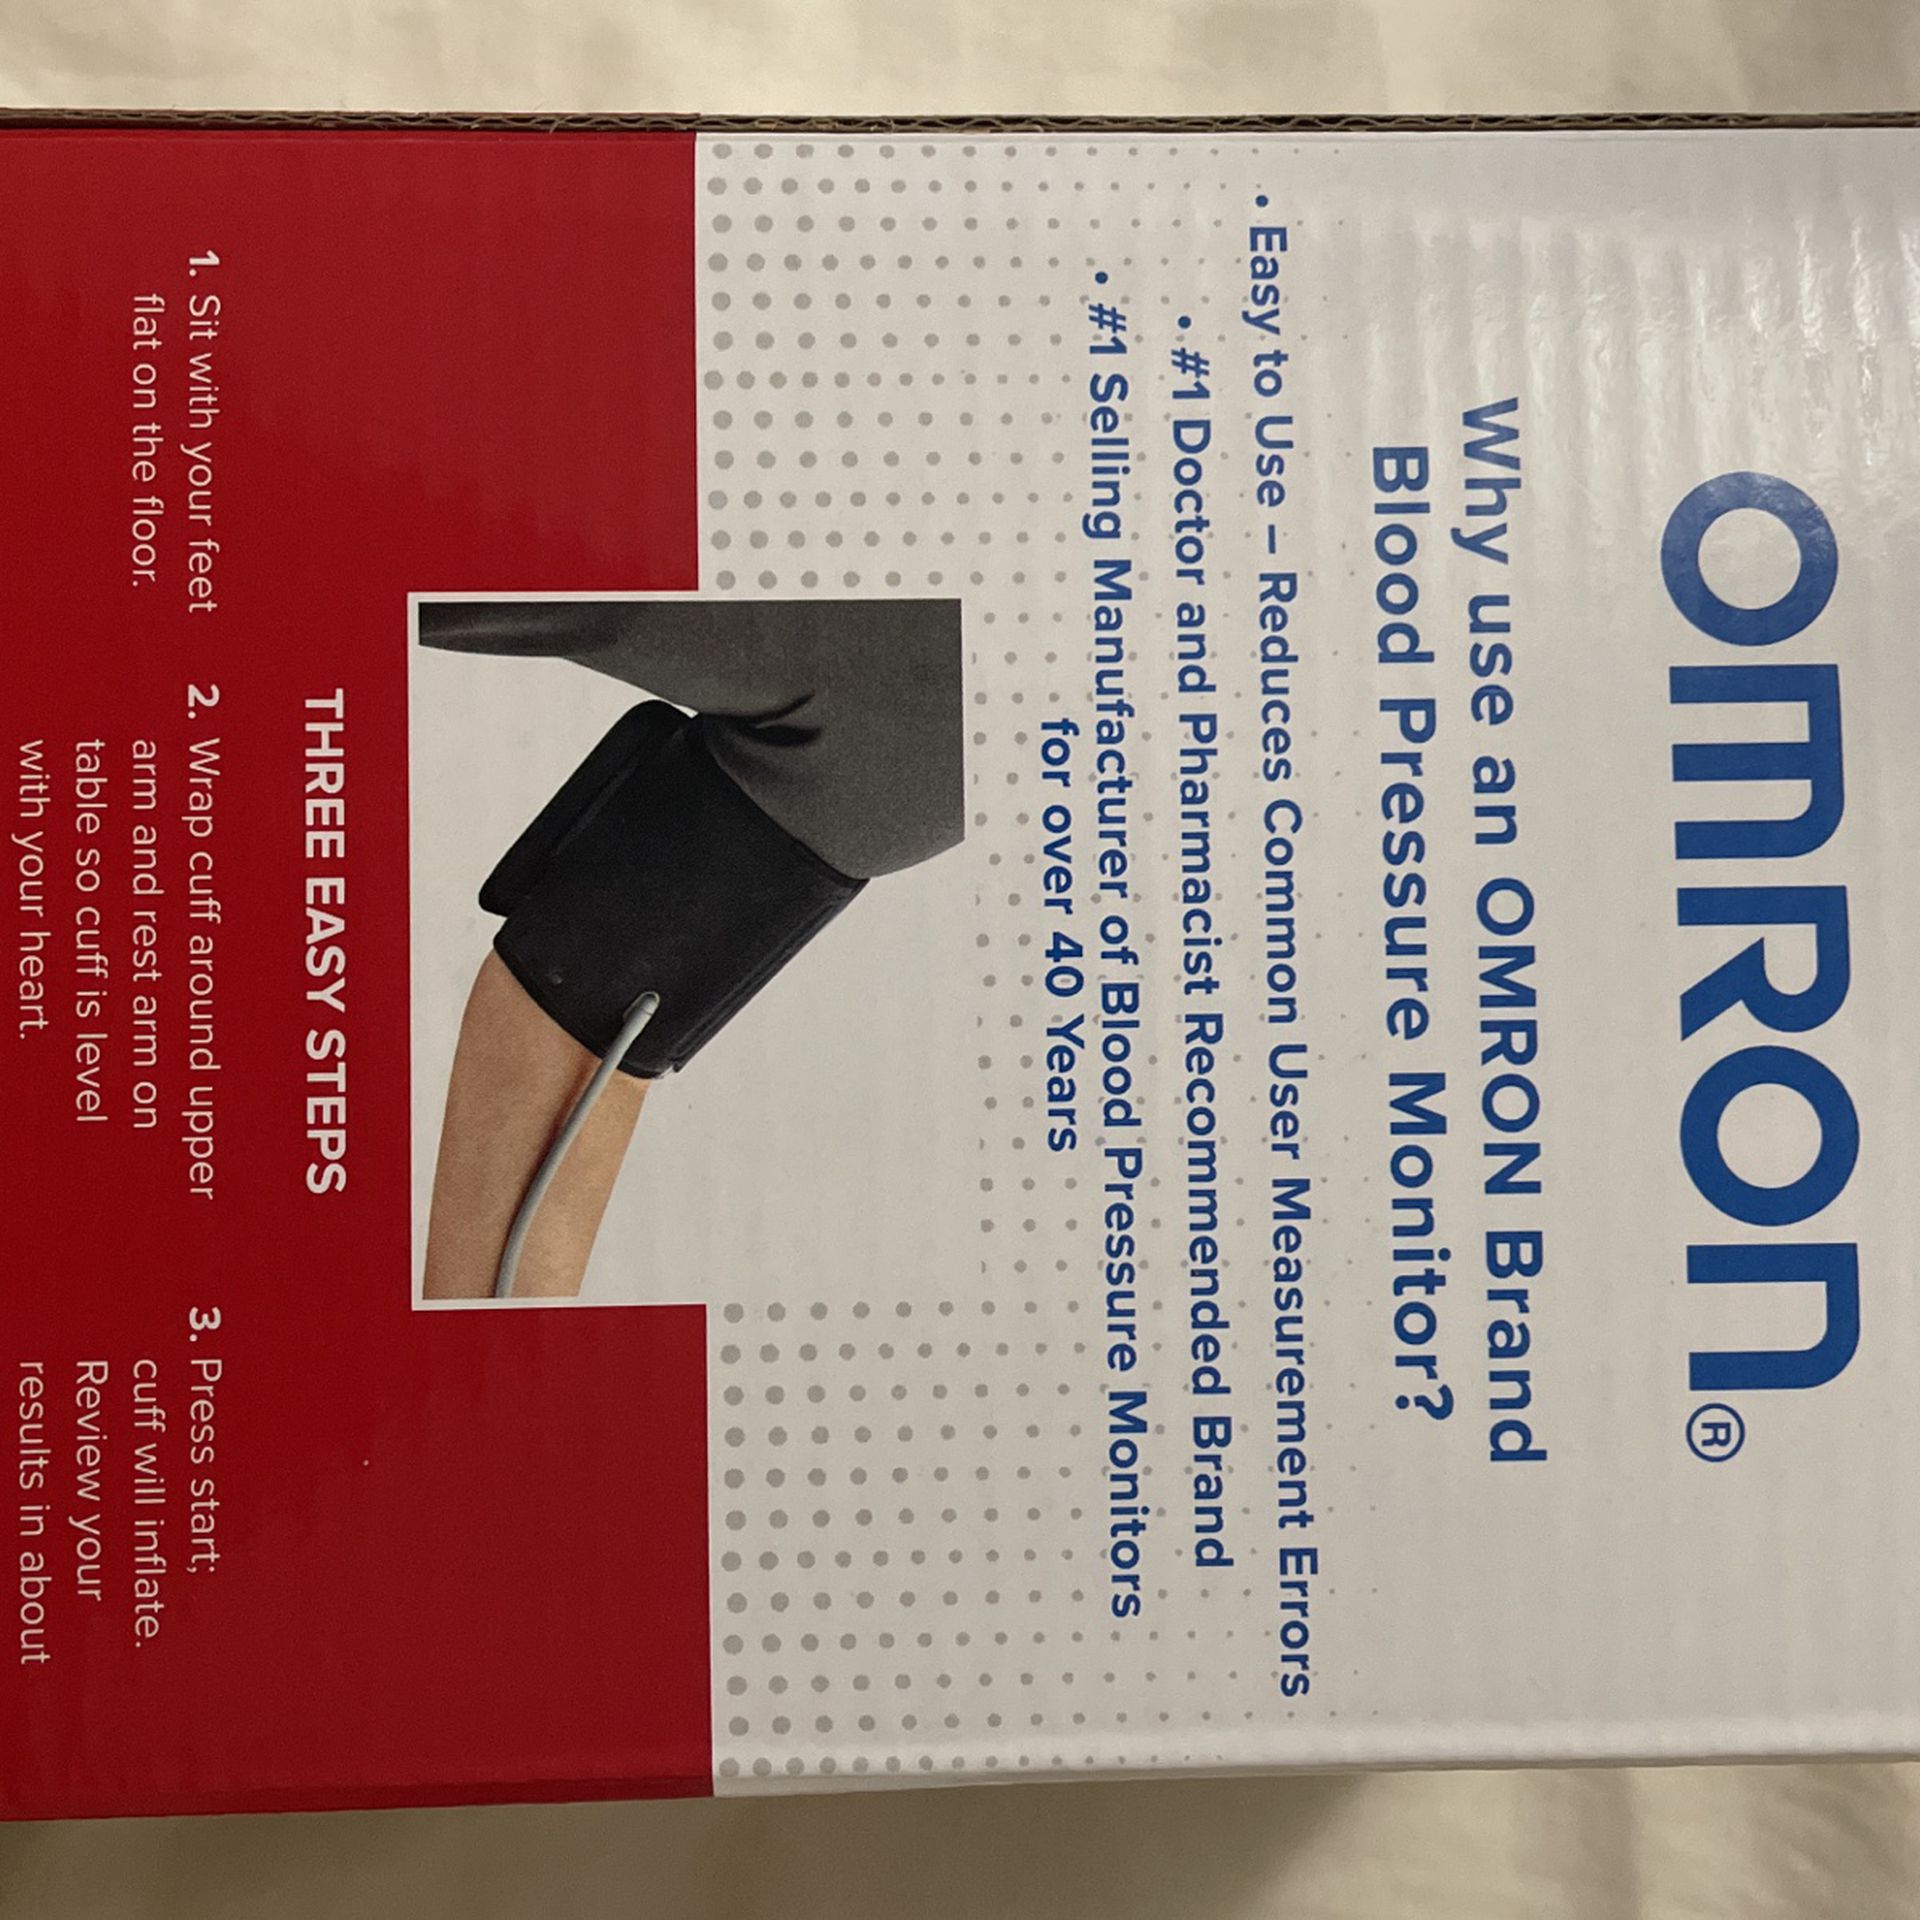 Omron 5 Series blood pressure monitor for Sale in Stuart, FL - OfferUp